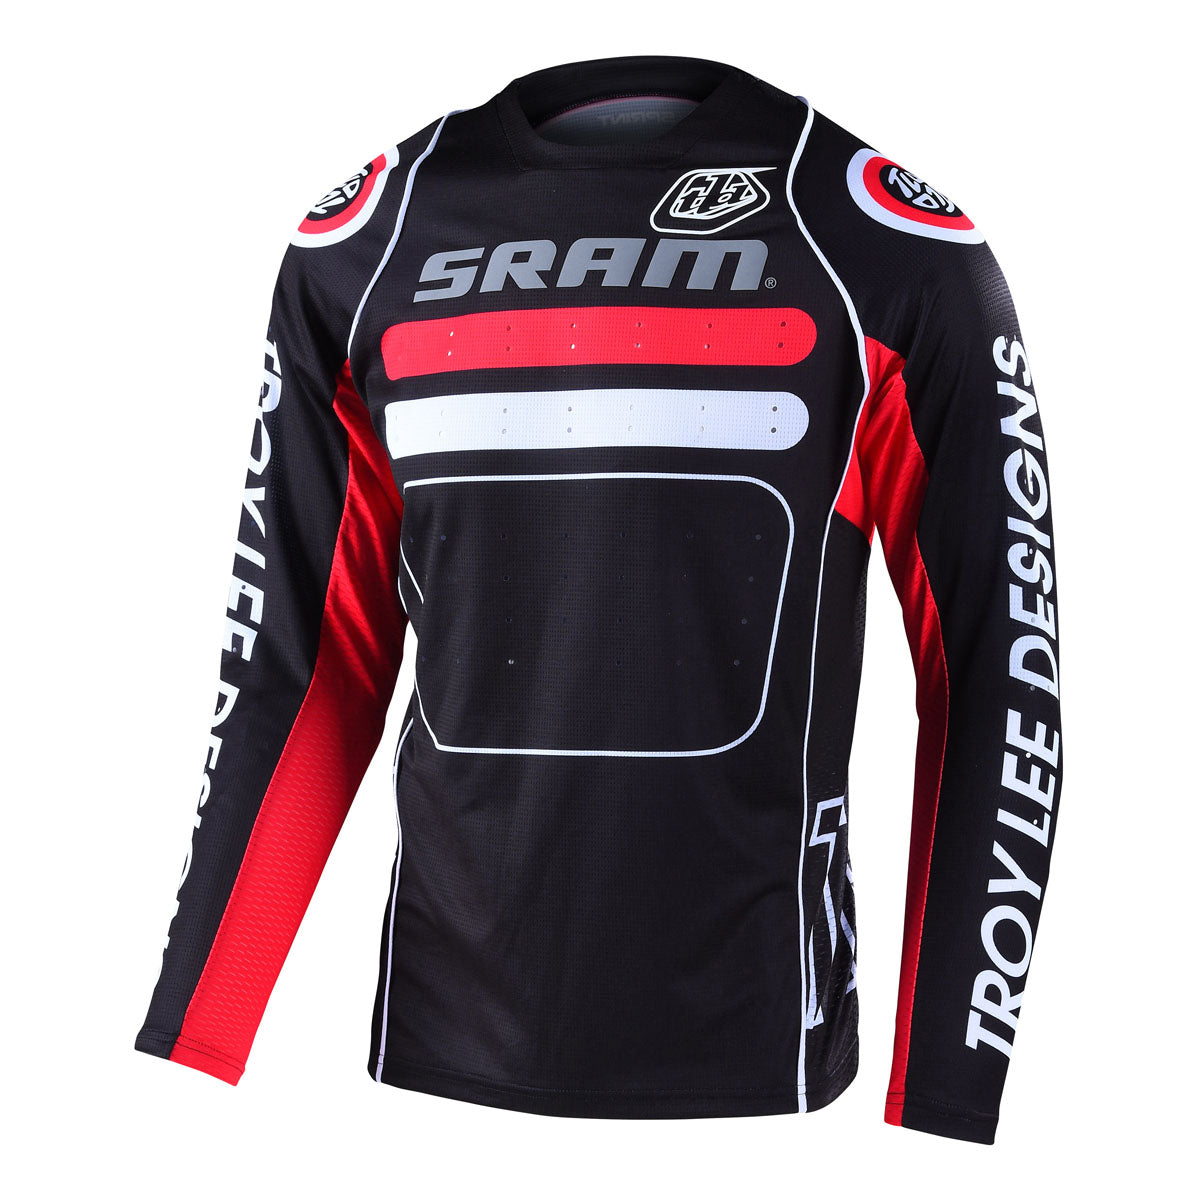 Troy Lee Designs Sprint Jersey (CLOSEOUT) - Drop In Sram Black